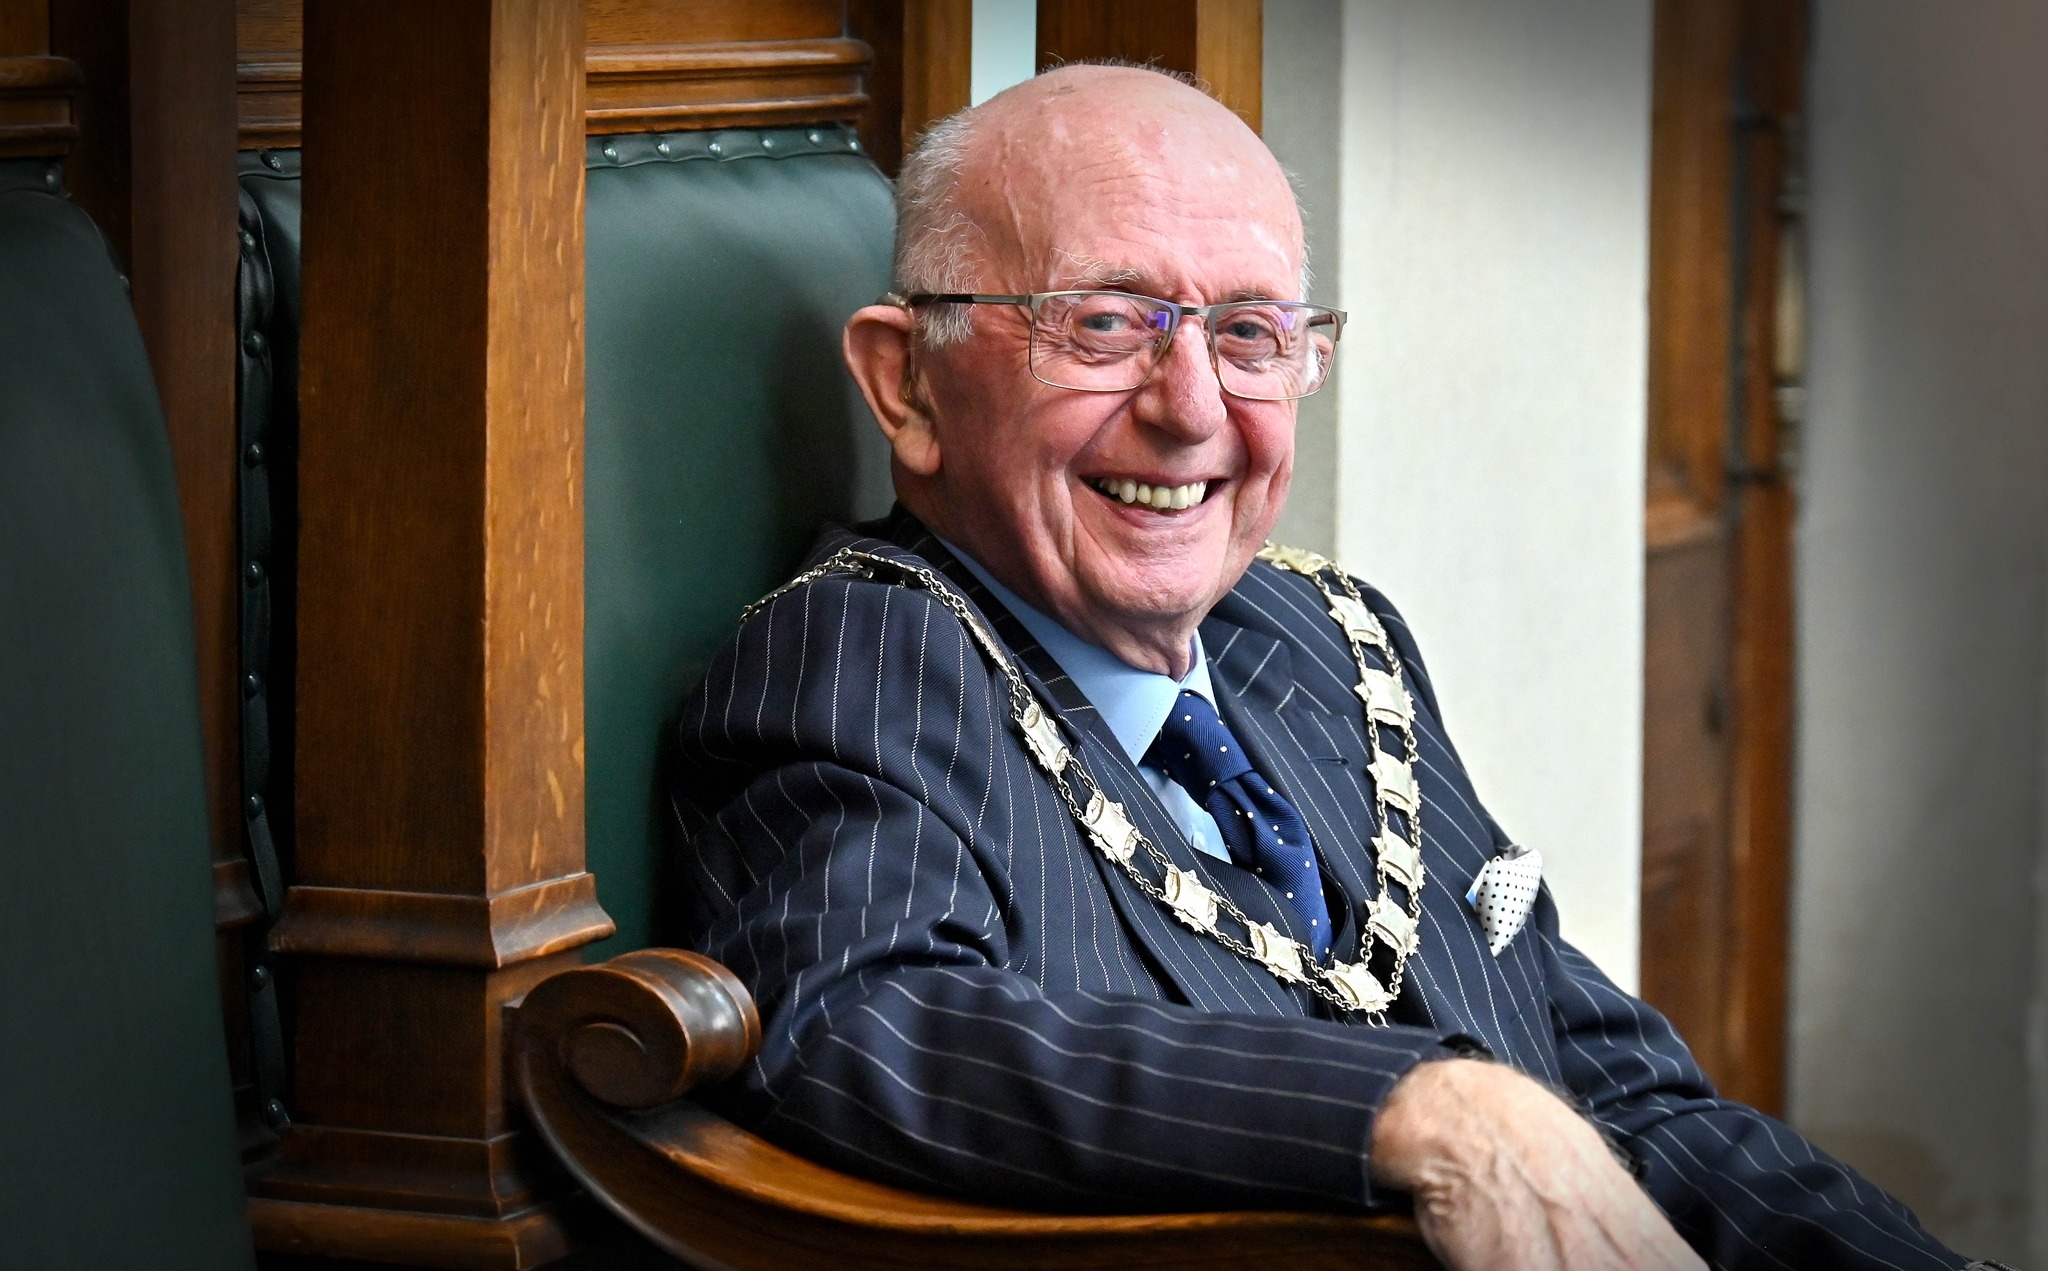 Mayor of Walsall, Councillor Anthony Harris